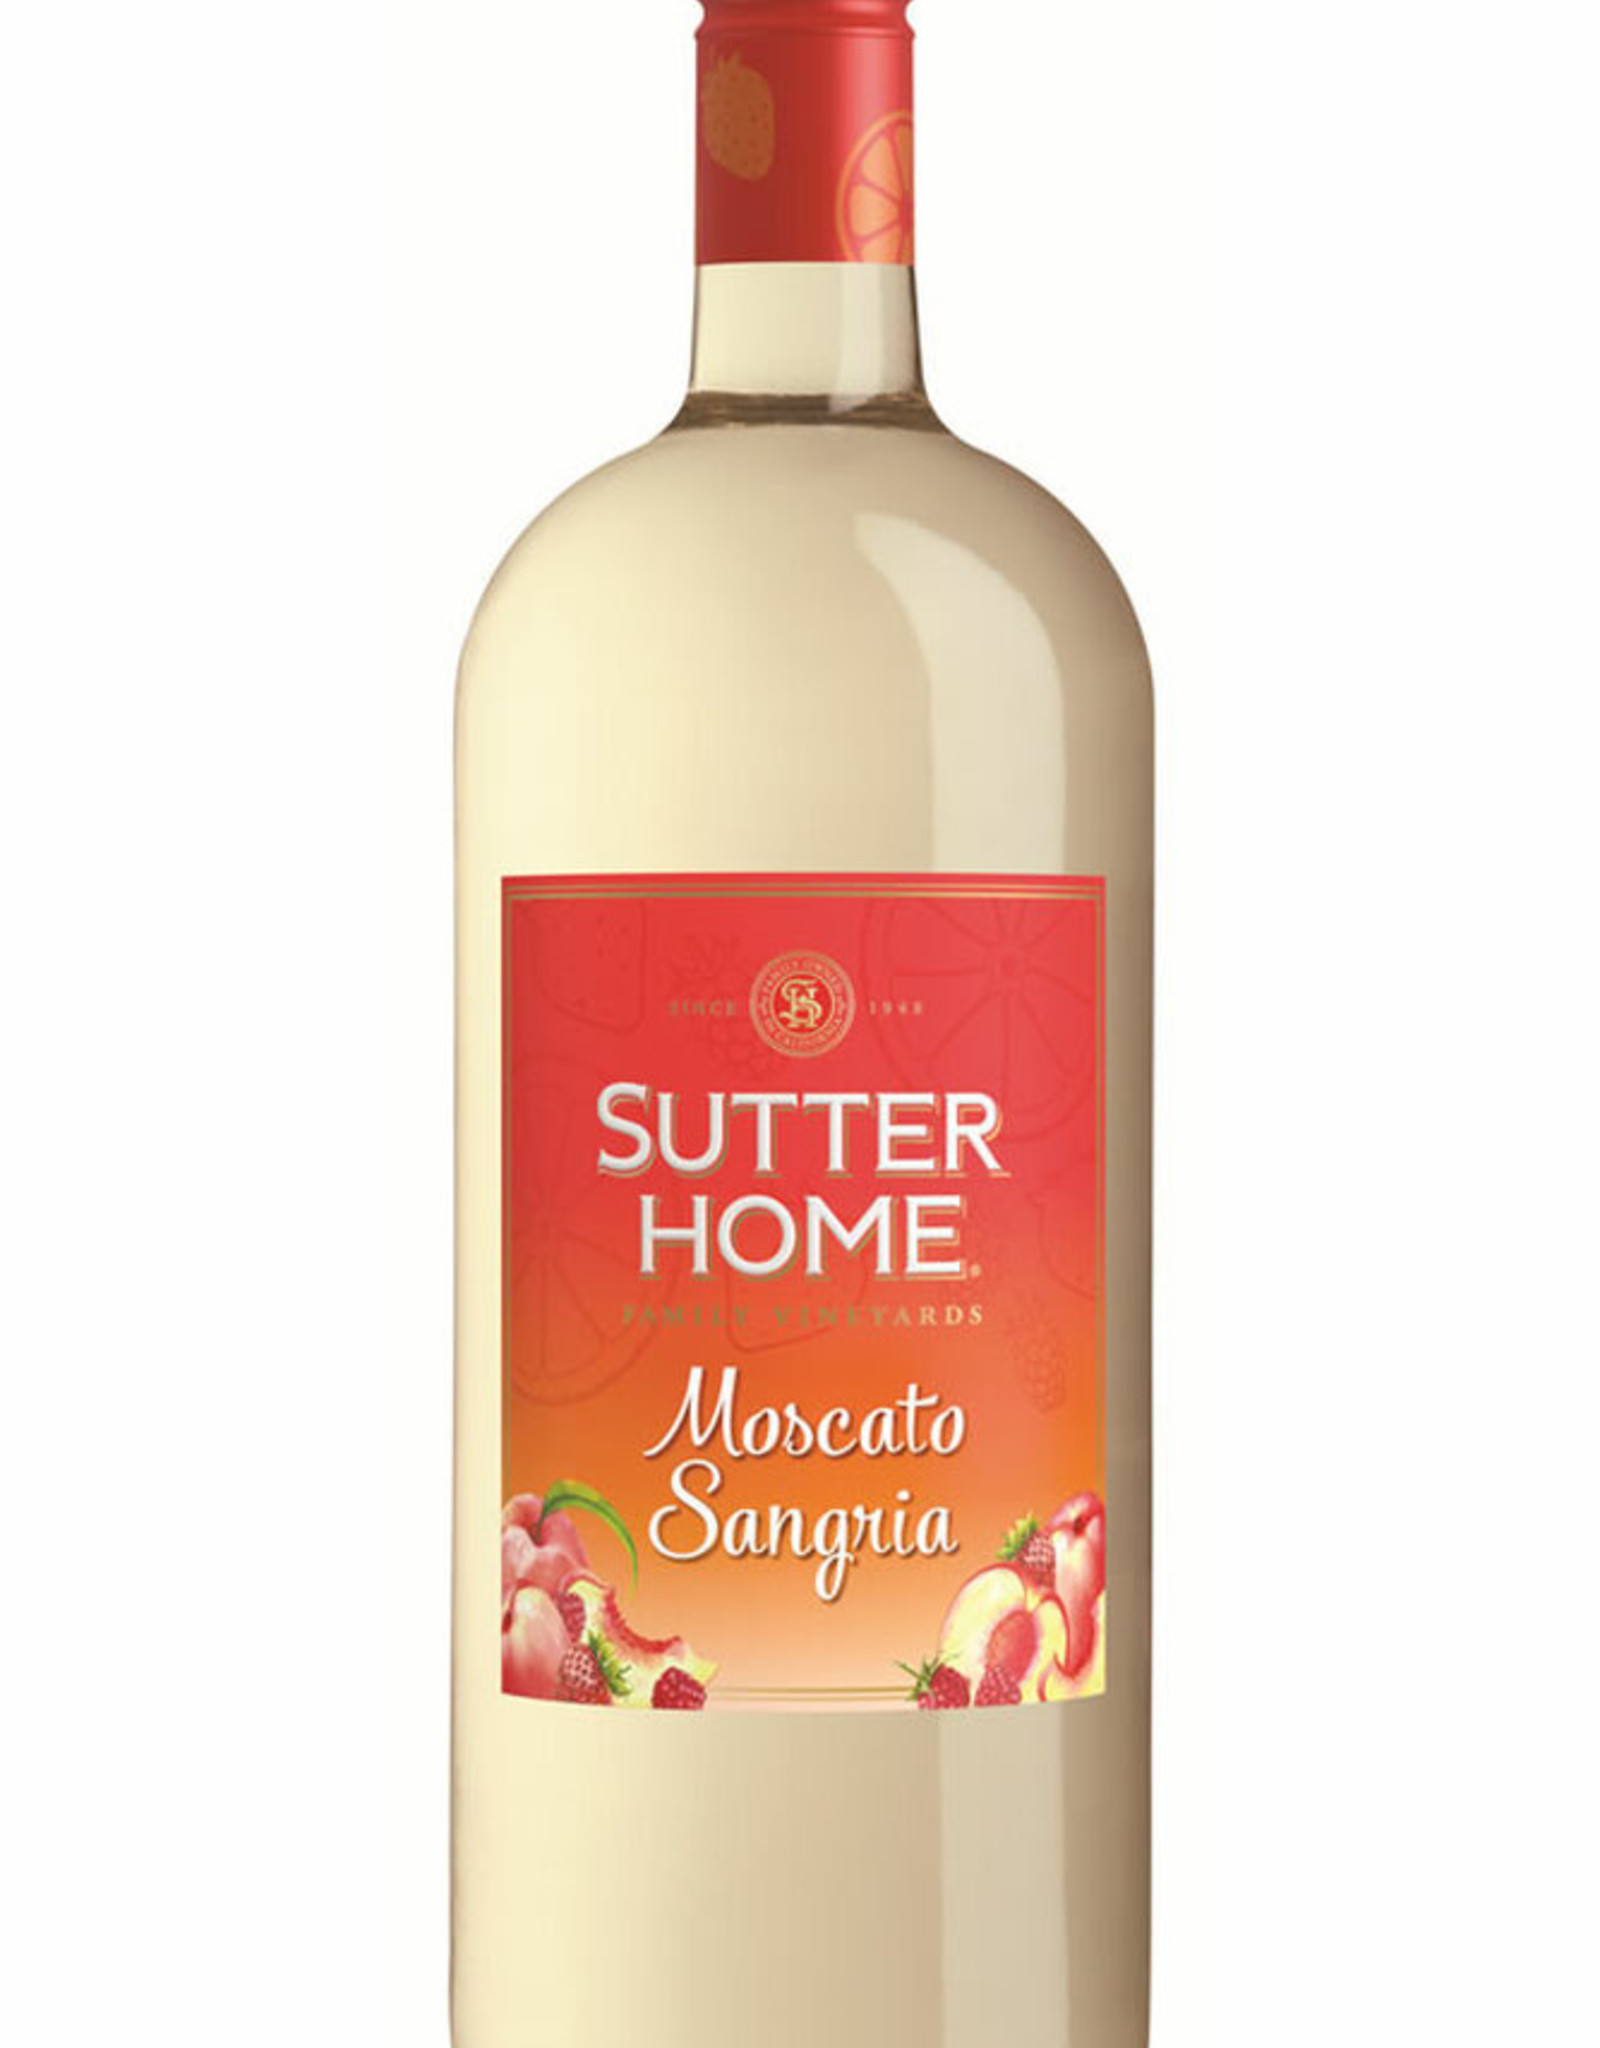 Sutter Home Sangria 1.5l - Cork and Key